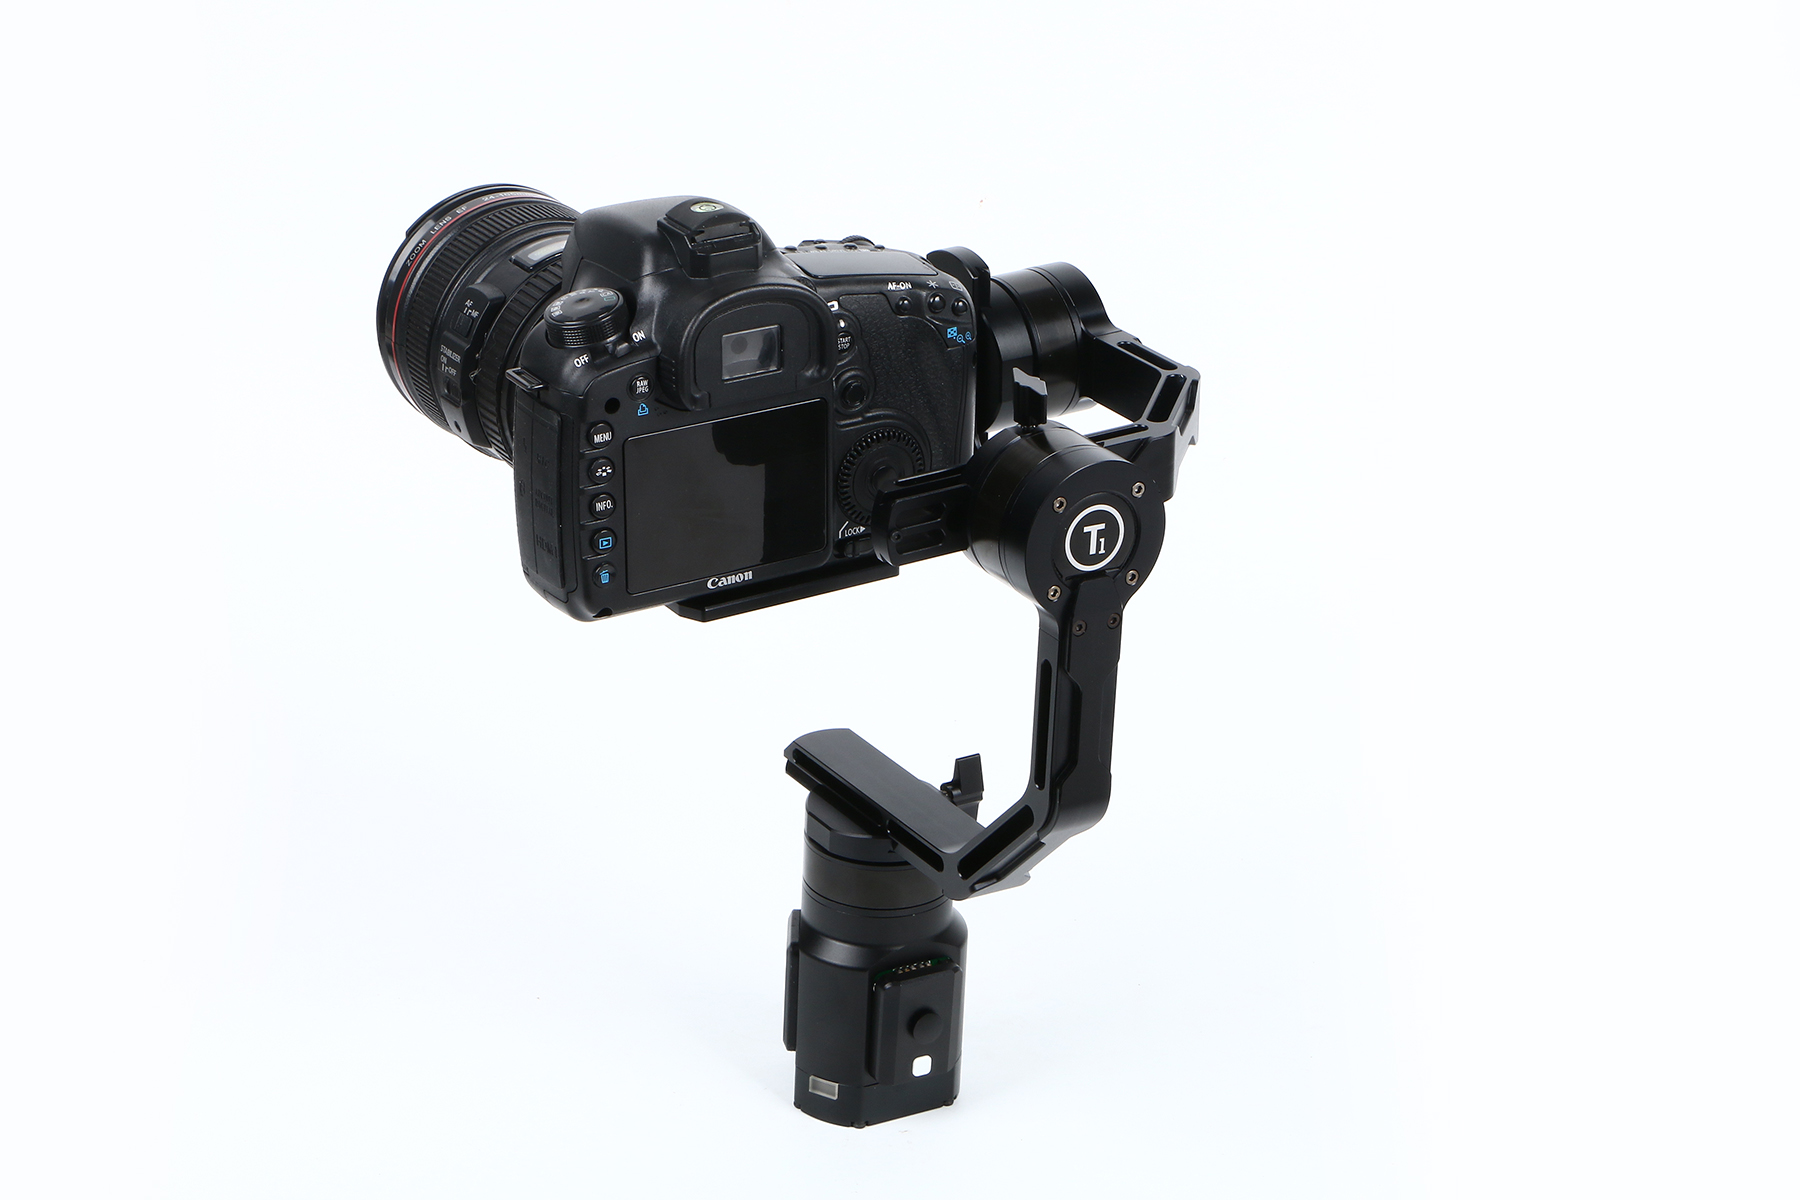 3-Axis Gimbal Handheld Stabilizer for small DSLR Cameras